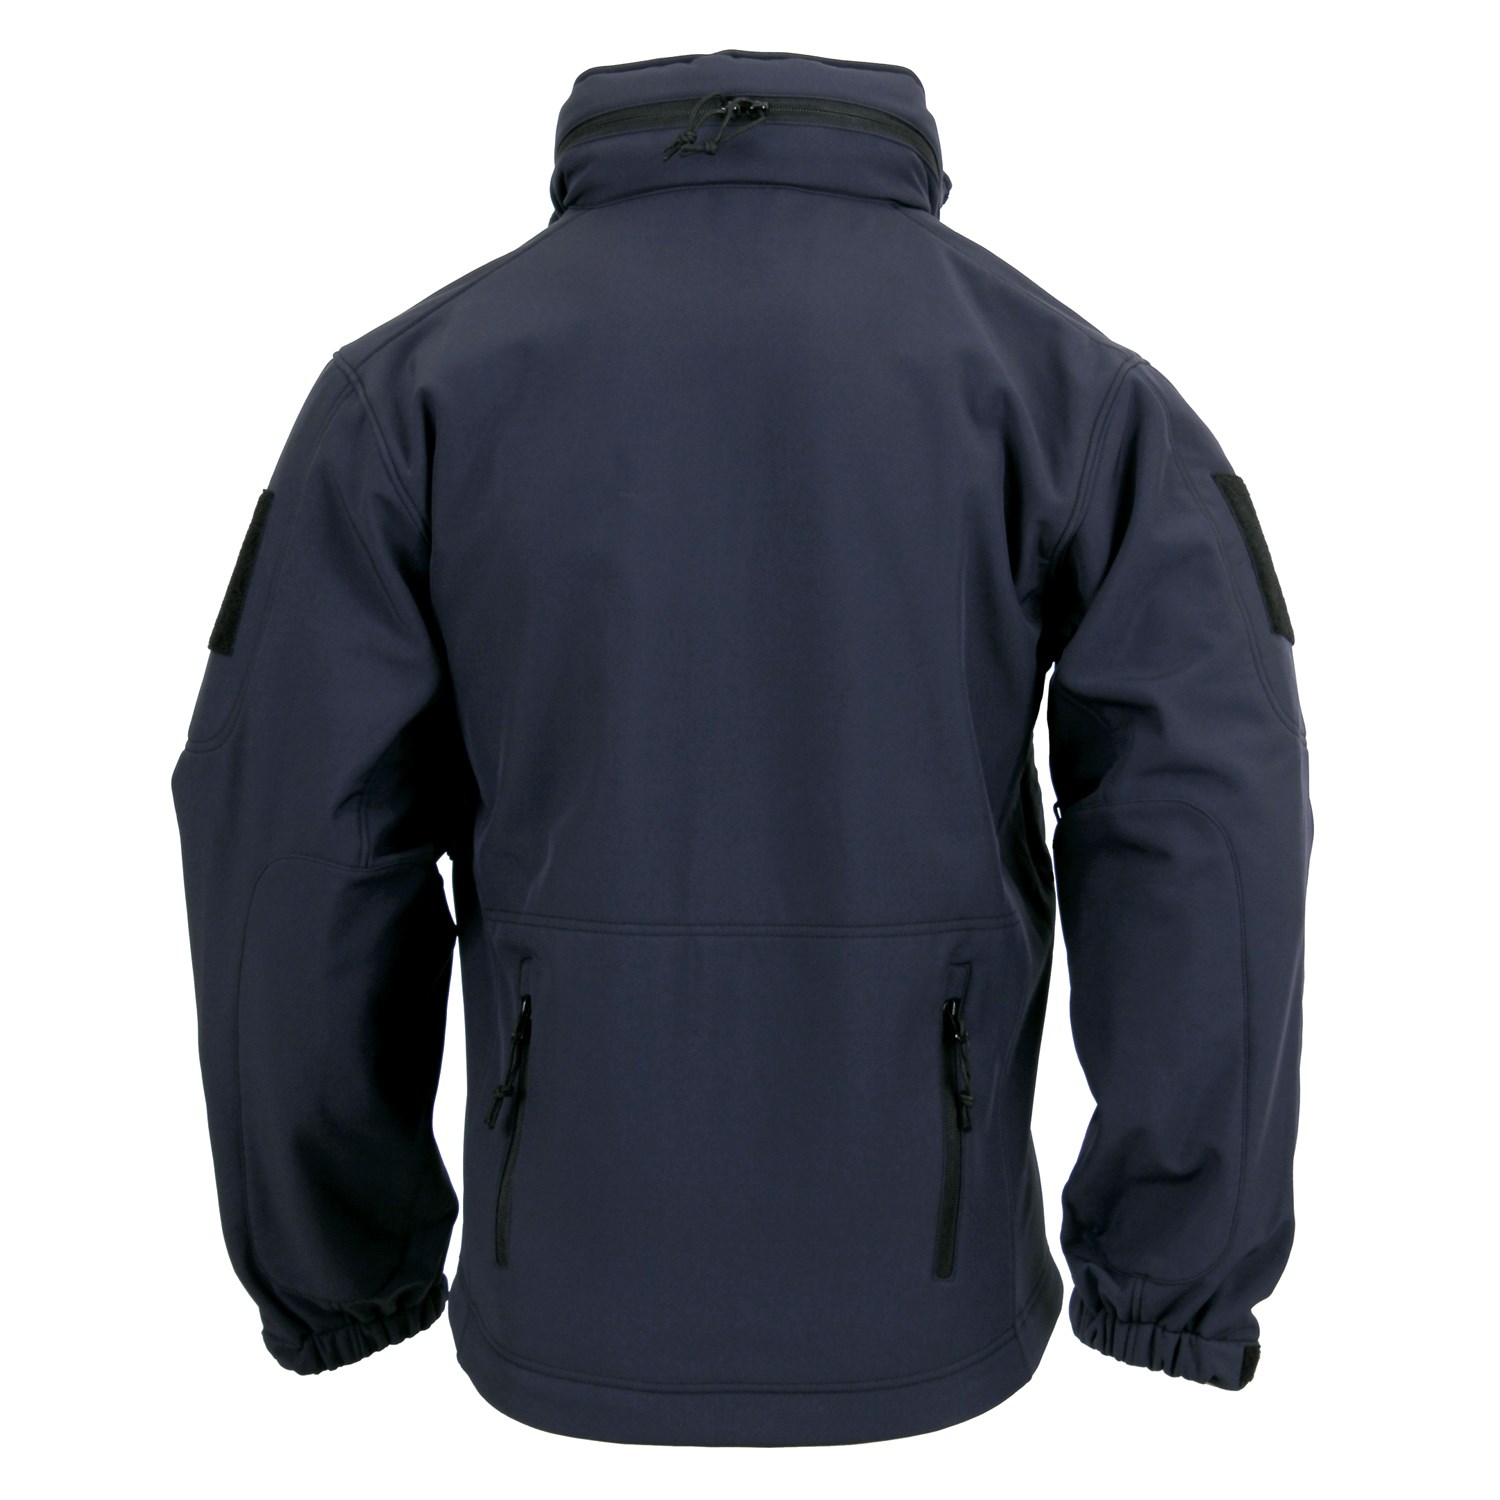 Concealed Carry Soft Shell Jacket MIDNIGHT NAVY BLUE ROTHCO 56385 L-11